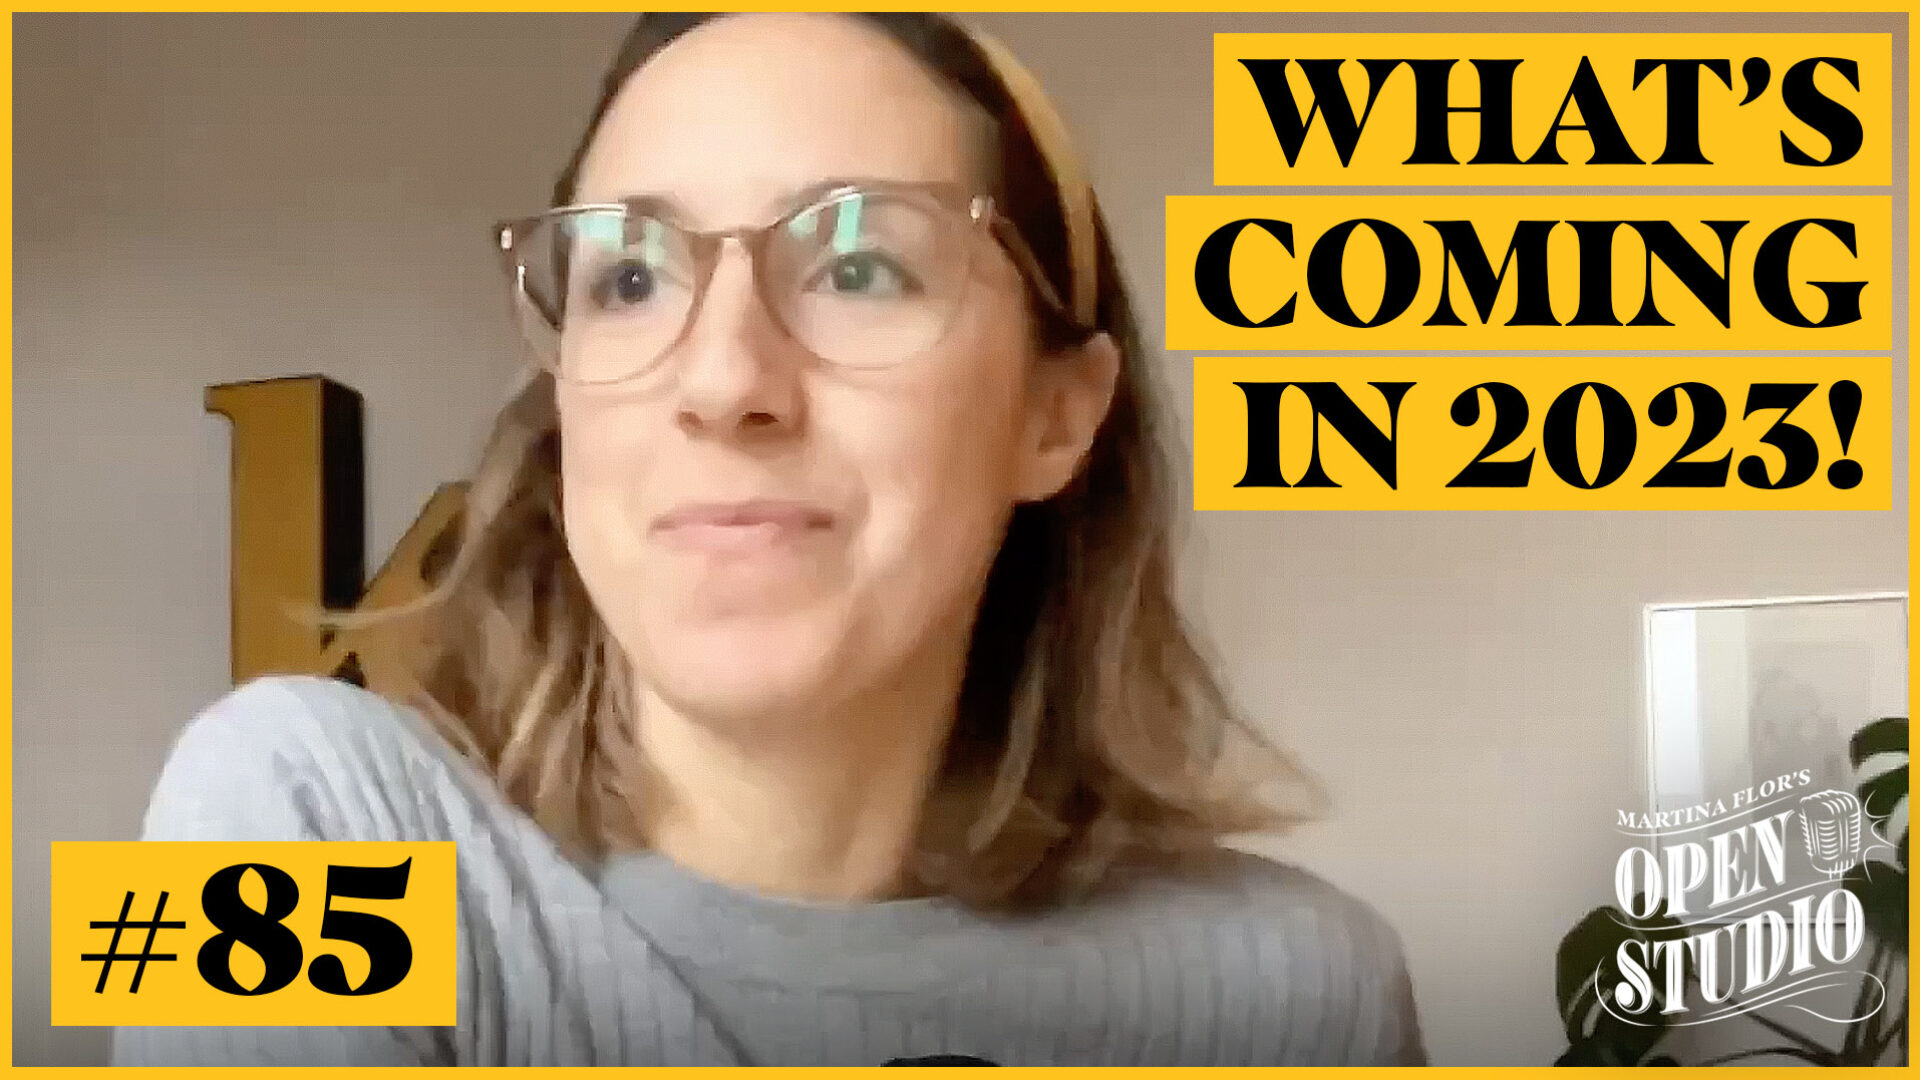 85. Martina Flor – What’s coming on season 4